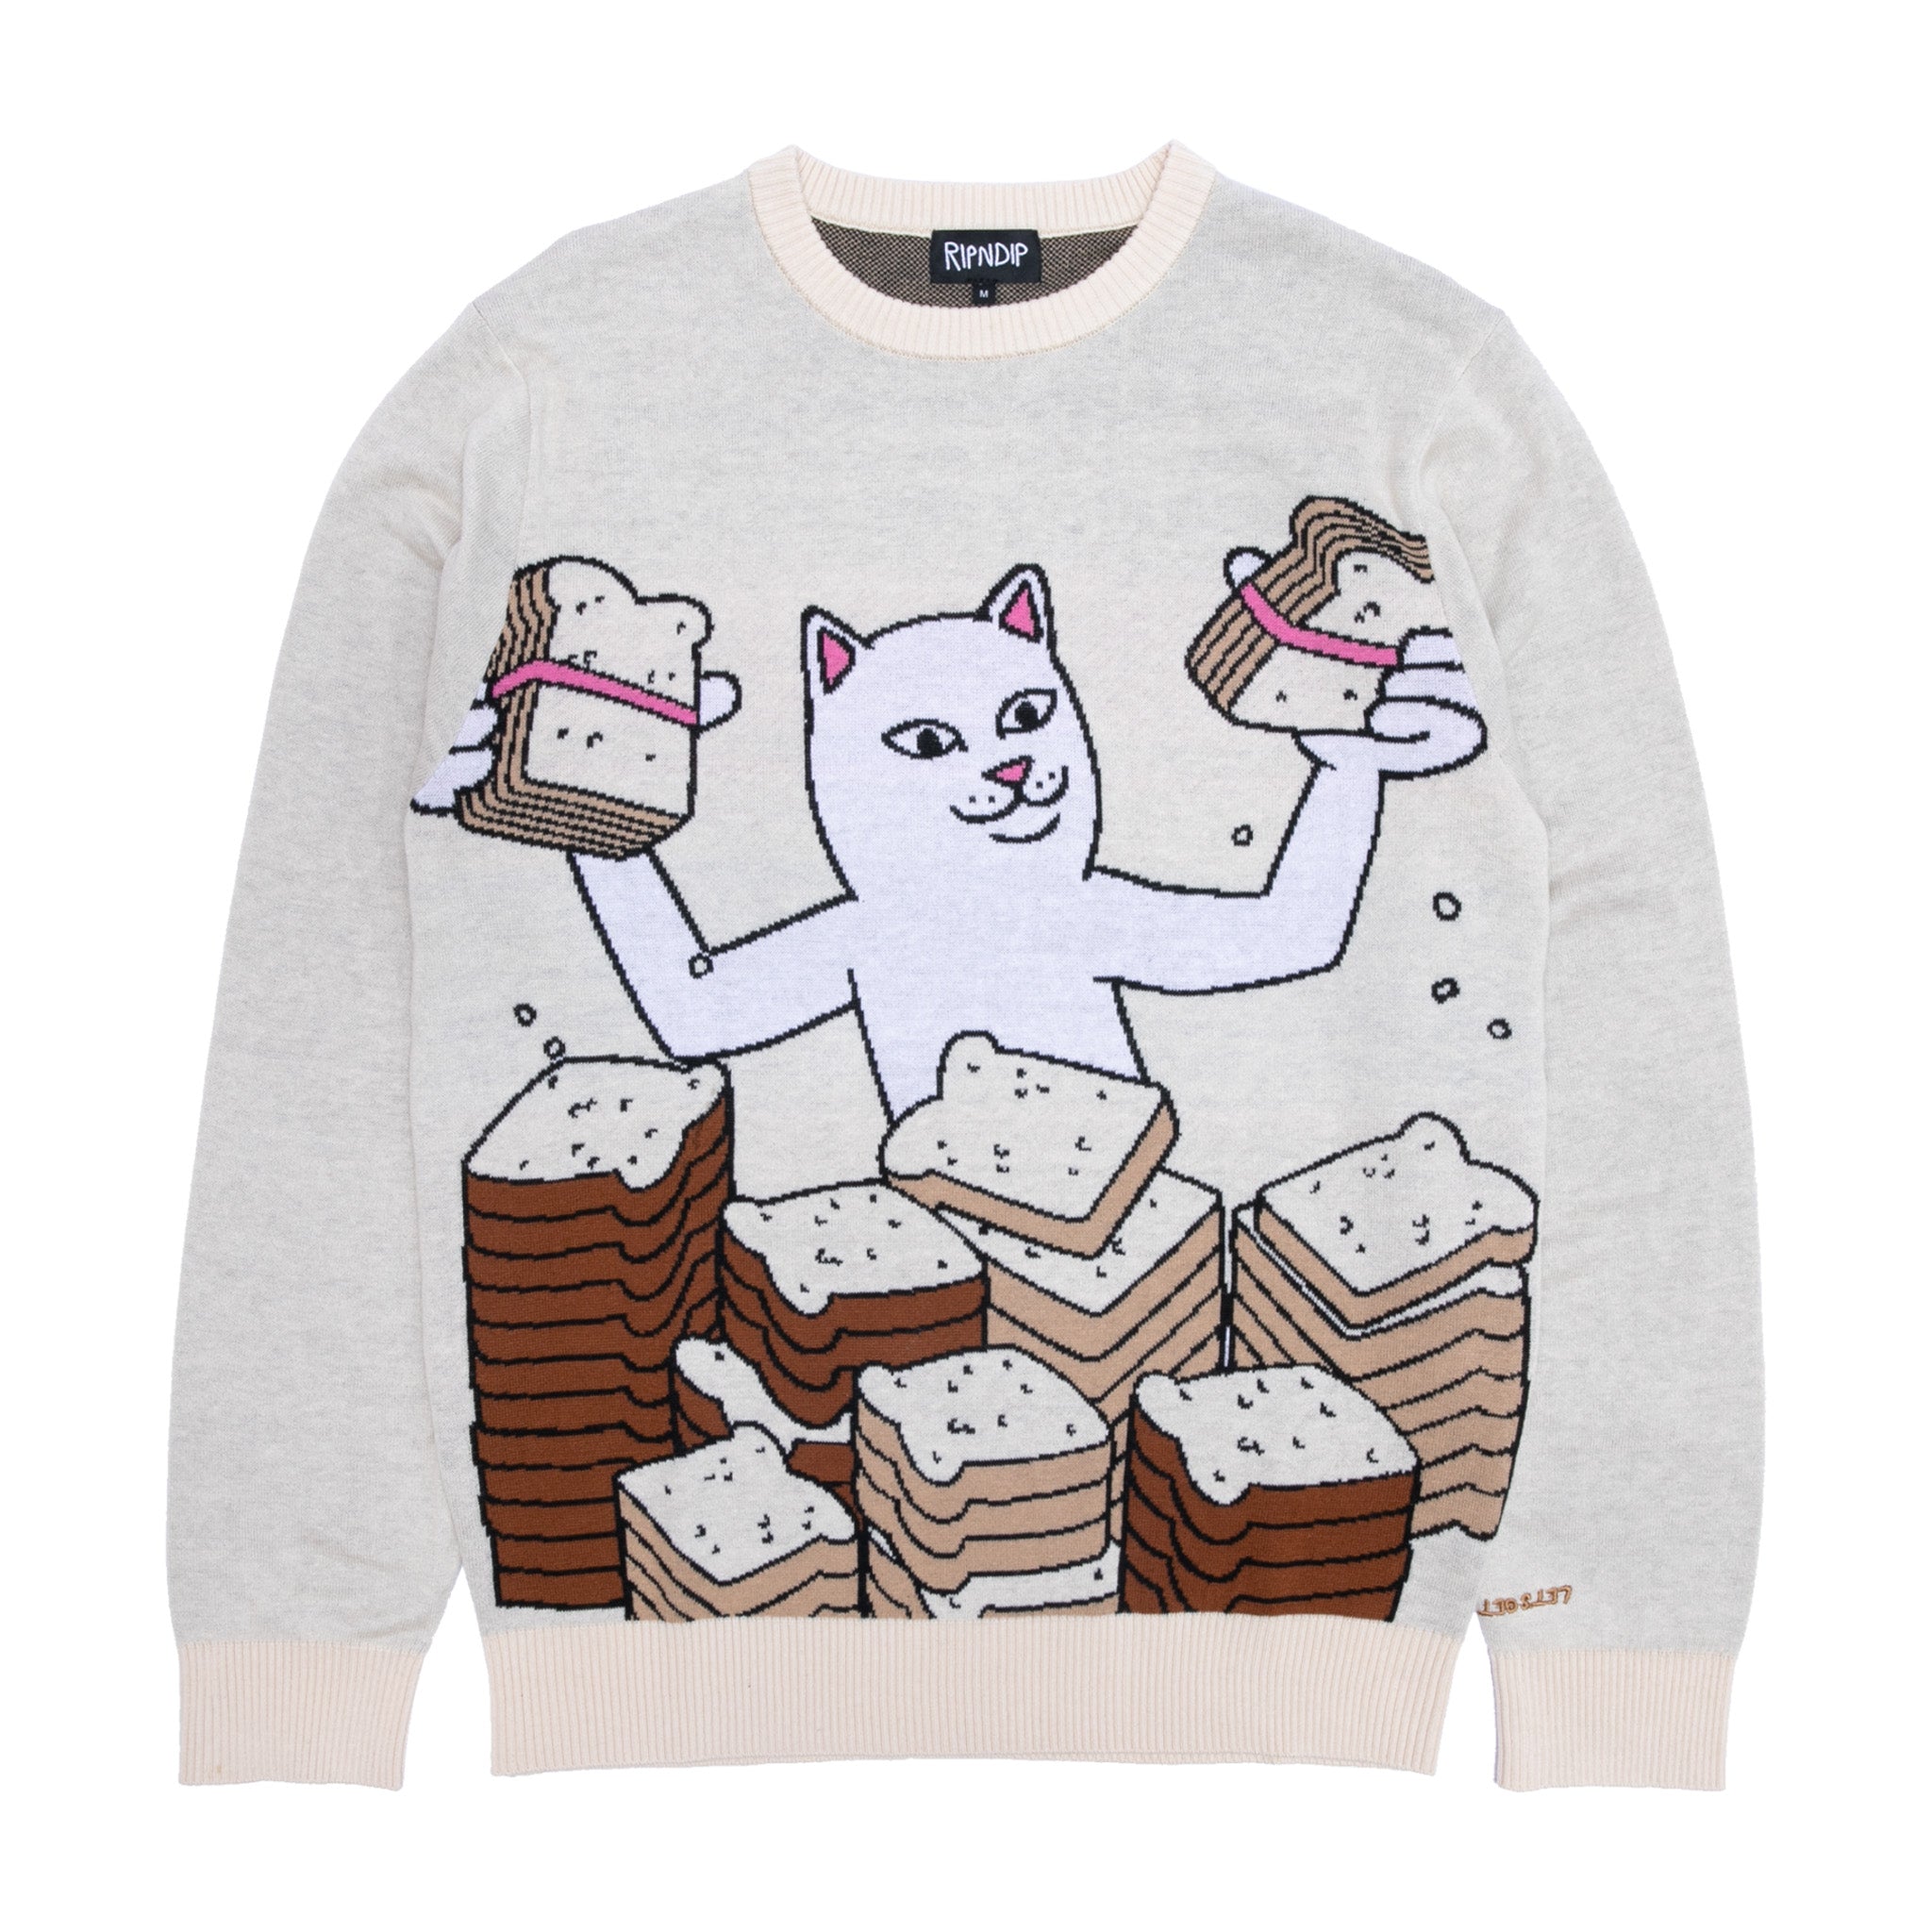 Lets Get This Bread Knit Sweater (Natural)